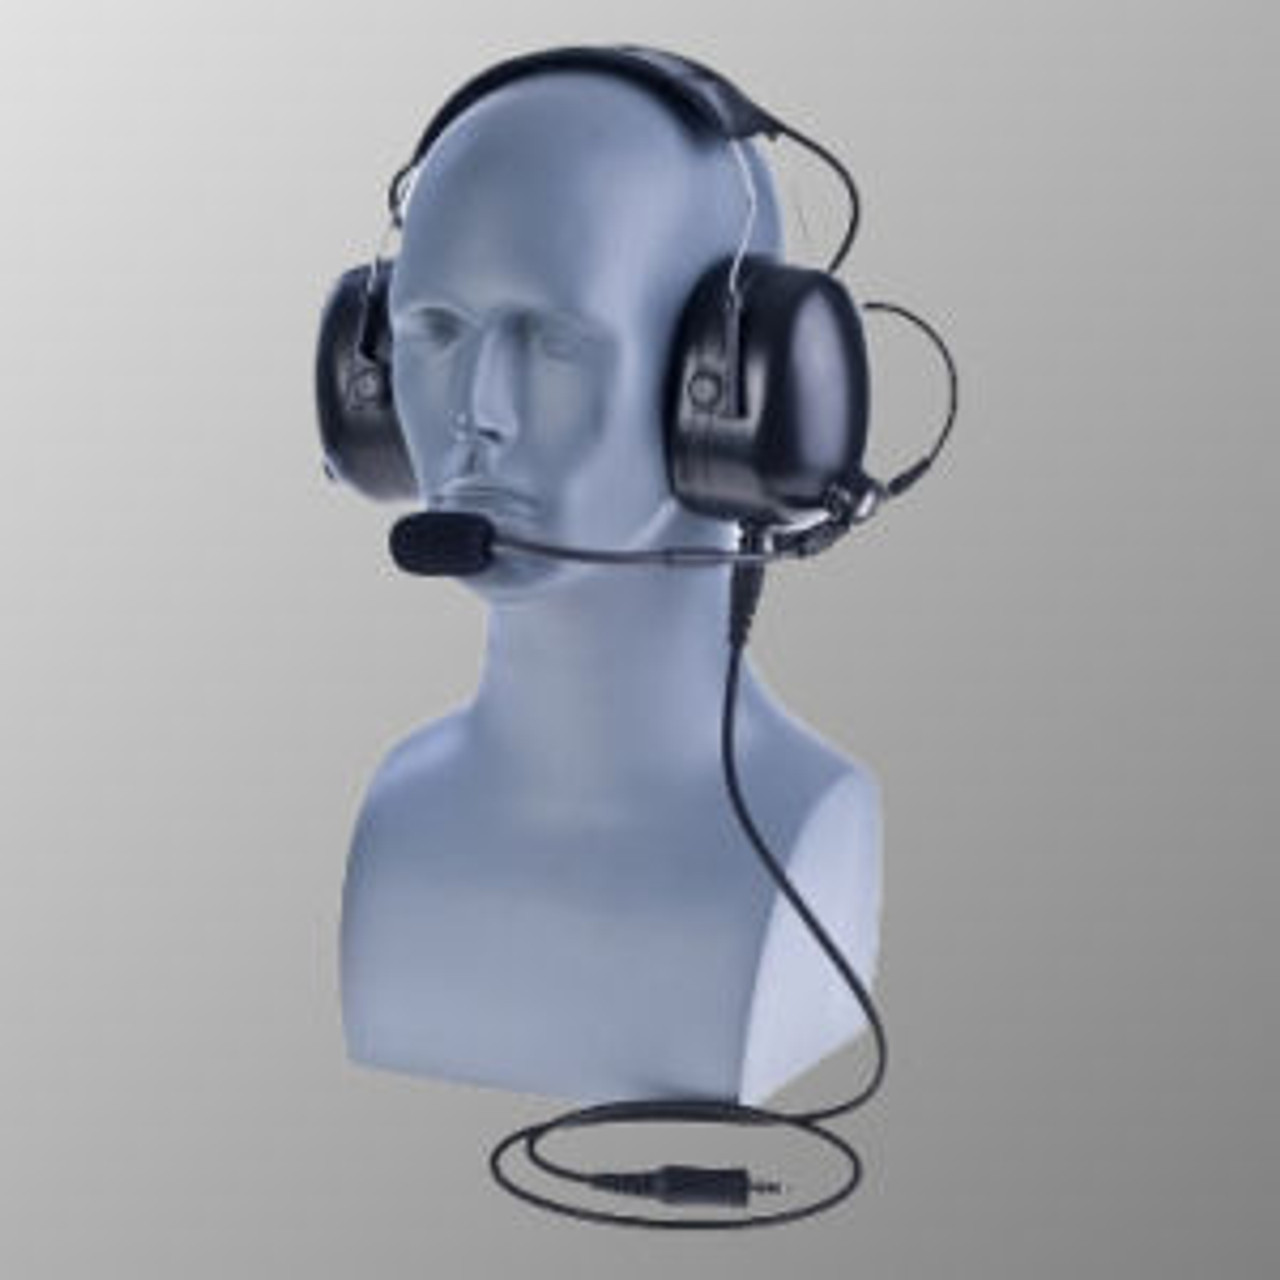 Motorola XPR7380 Over The Head Double Muff Headset